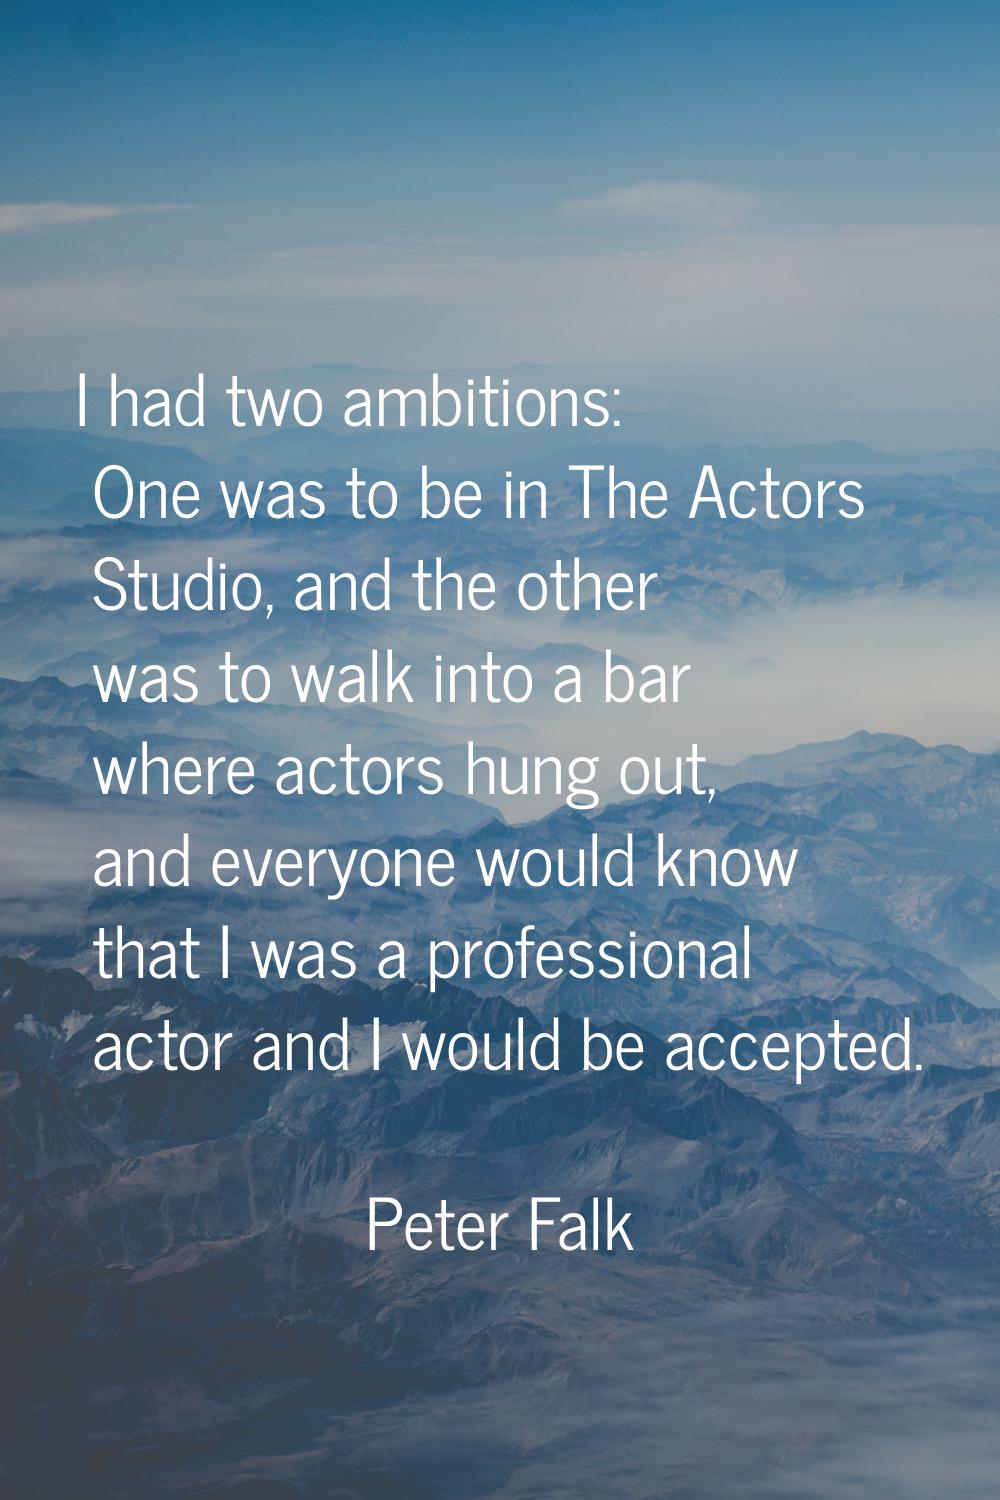 I had two ambitions: One was to be in The Actors Studio, and the other was to walk into a bar where